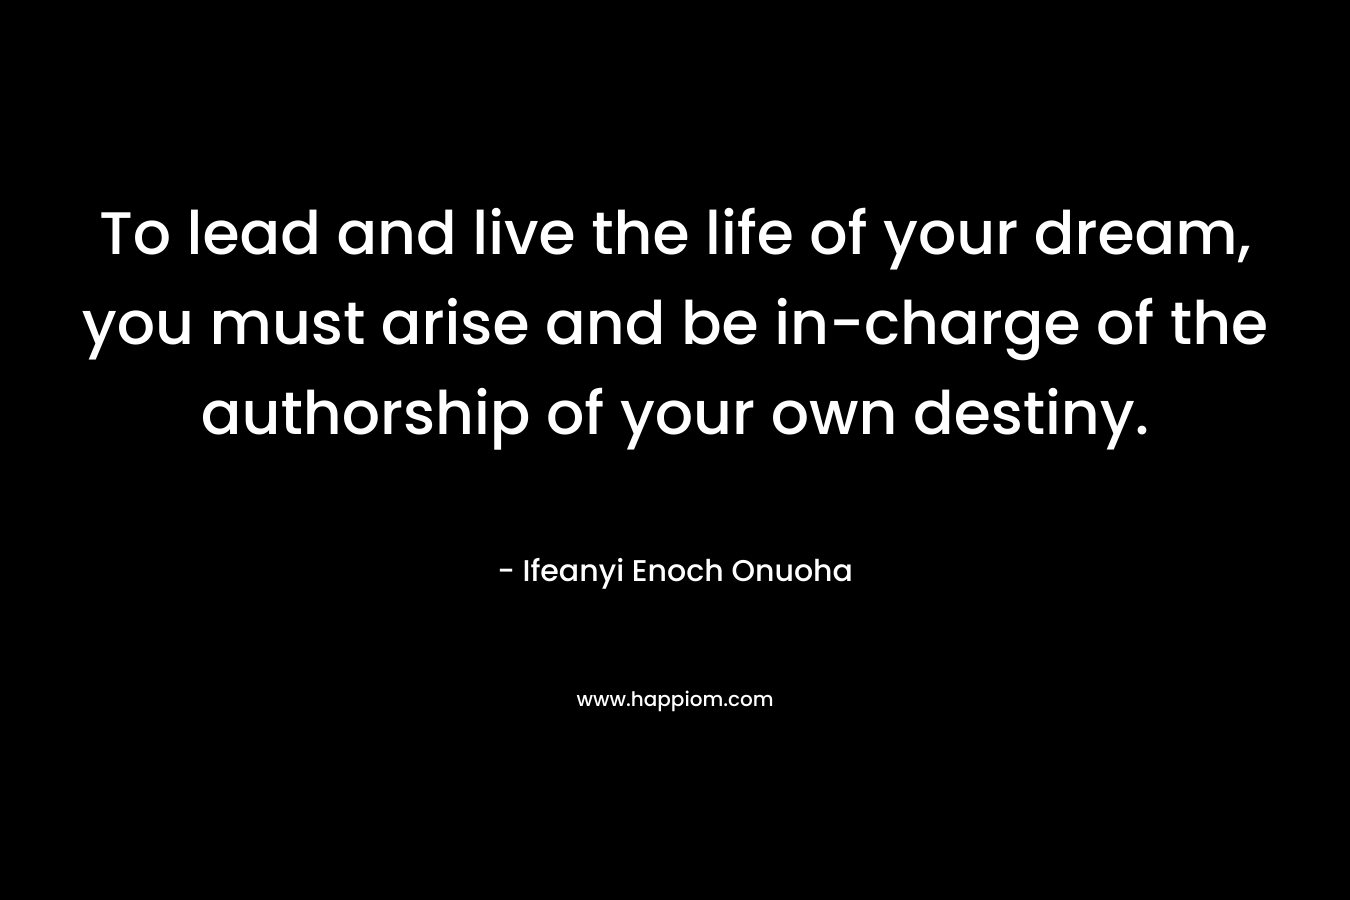 To lead and live the life of your dream, you must arise and be in-charge of the authorship of your own destiny. – Ifeanyi Enoch Onuoha